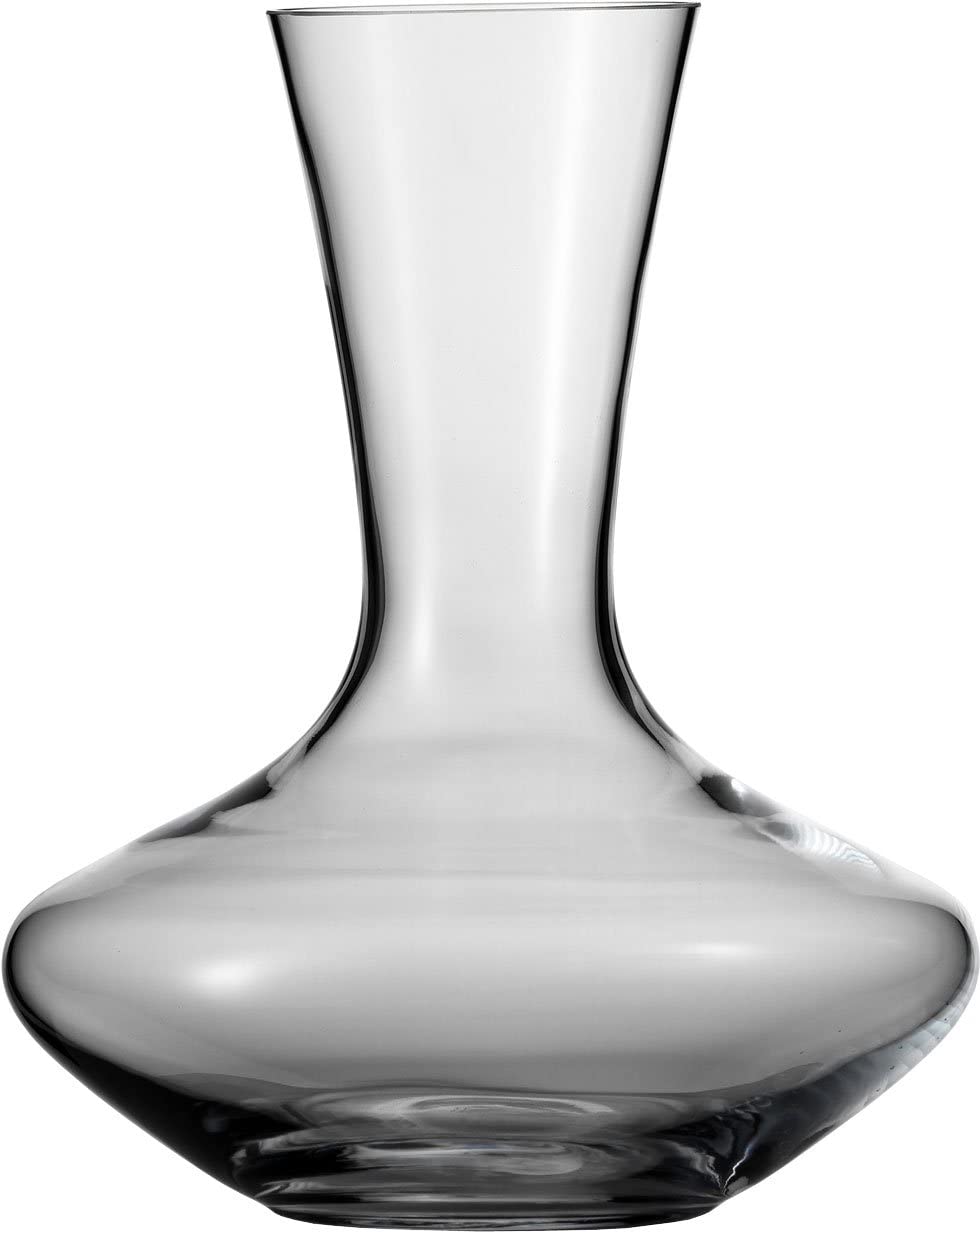 Schott Zwiesel Classico Decanter Caraf, Tritan Crystal Glass with Drop Protect Protection, Transparent, Height: 230 mm, D: 191 mm